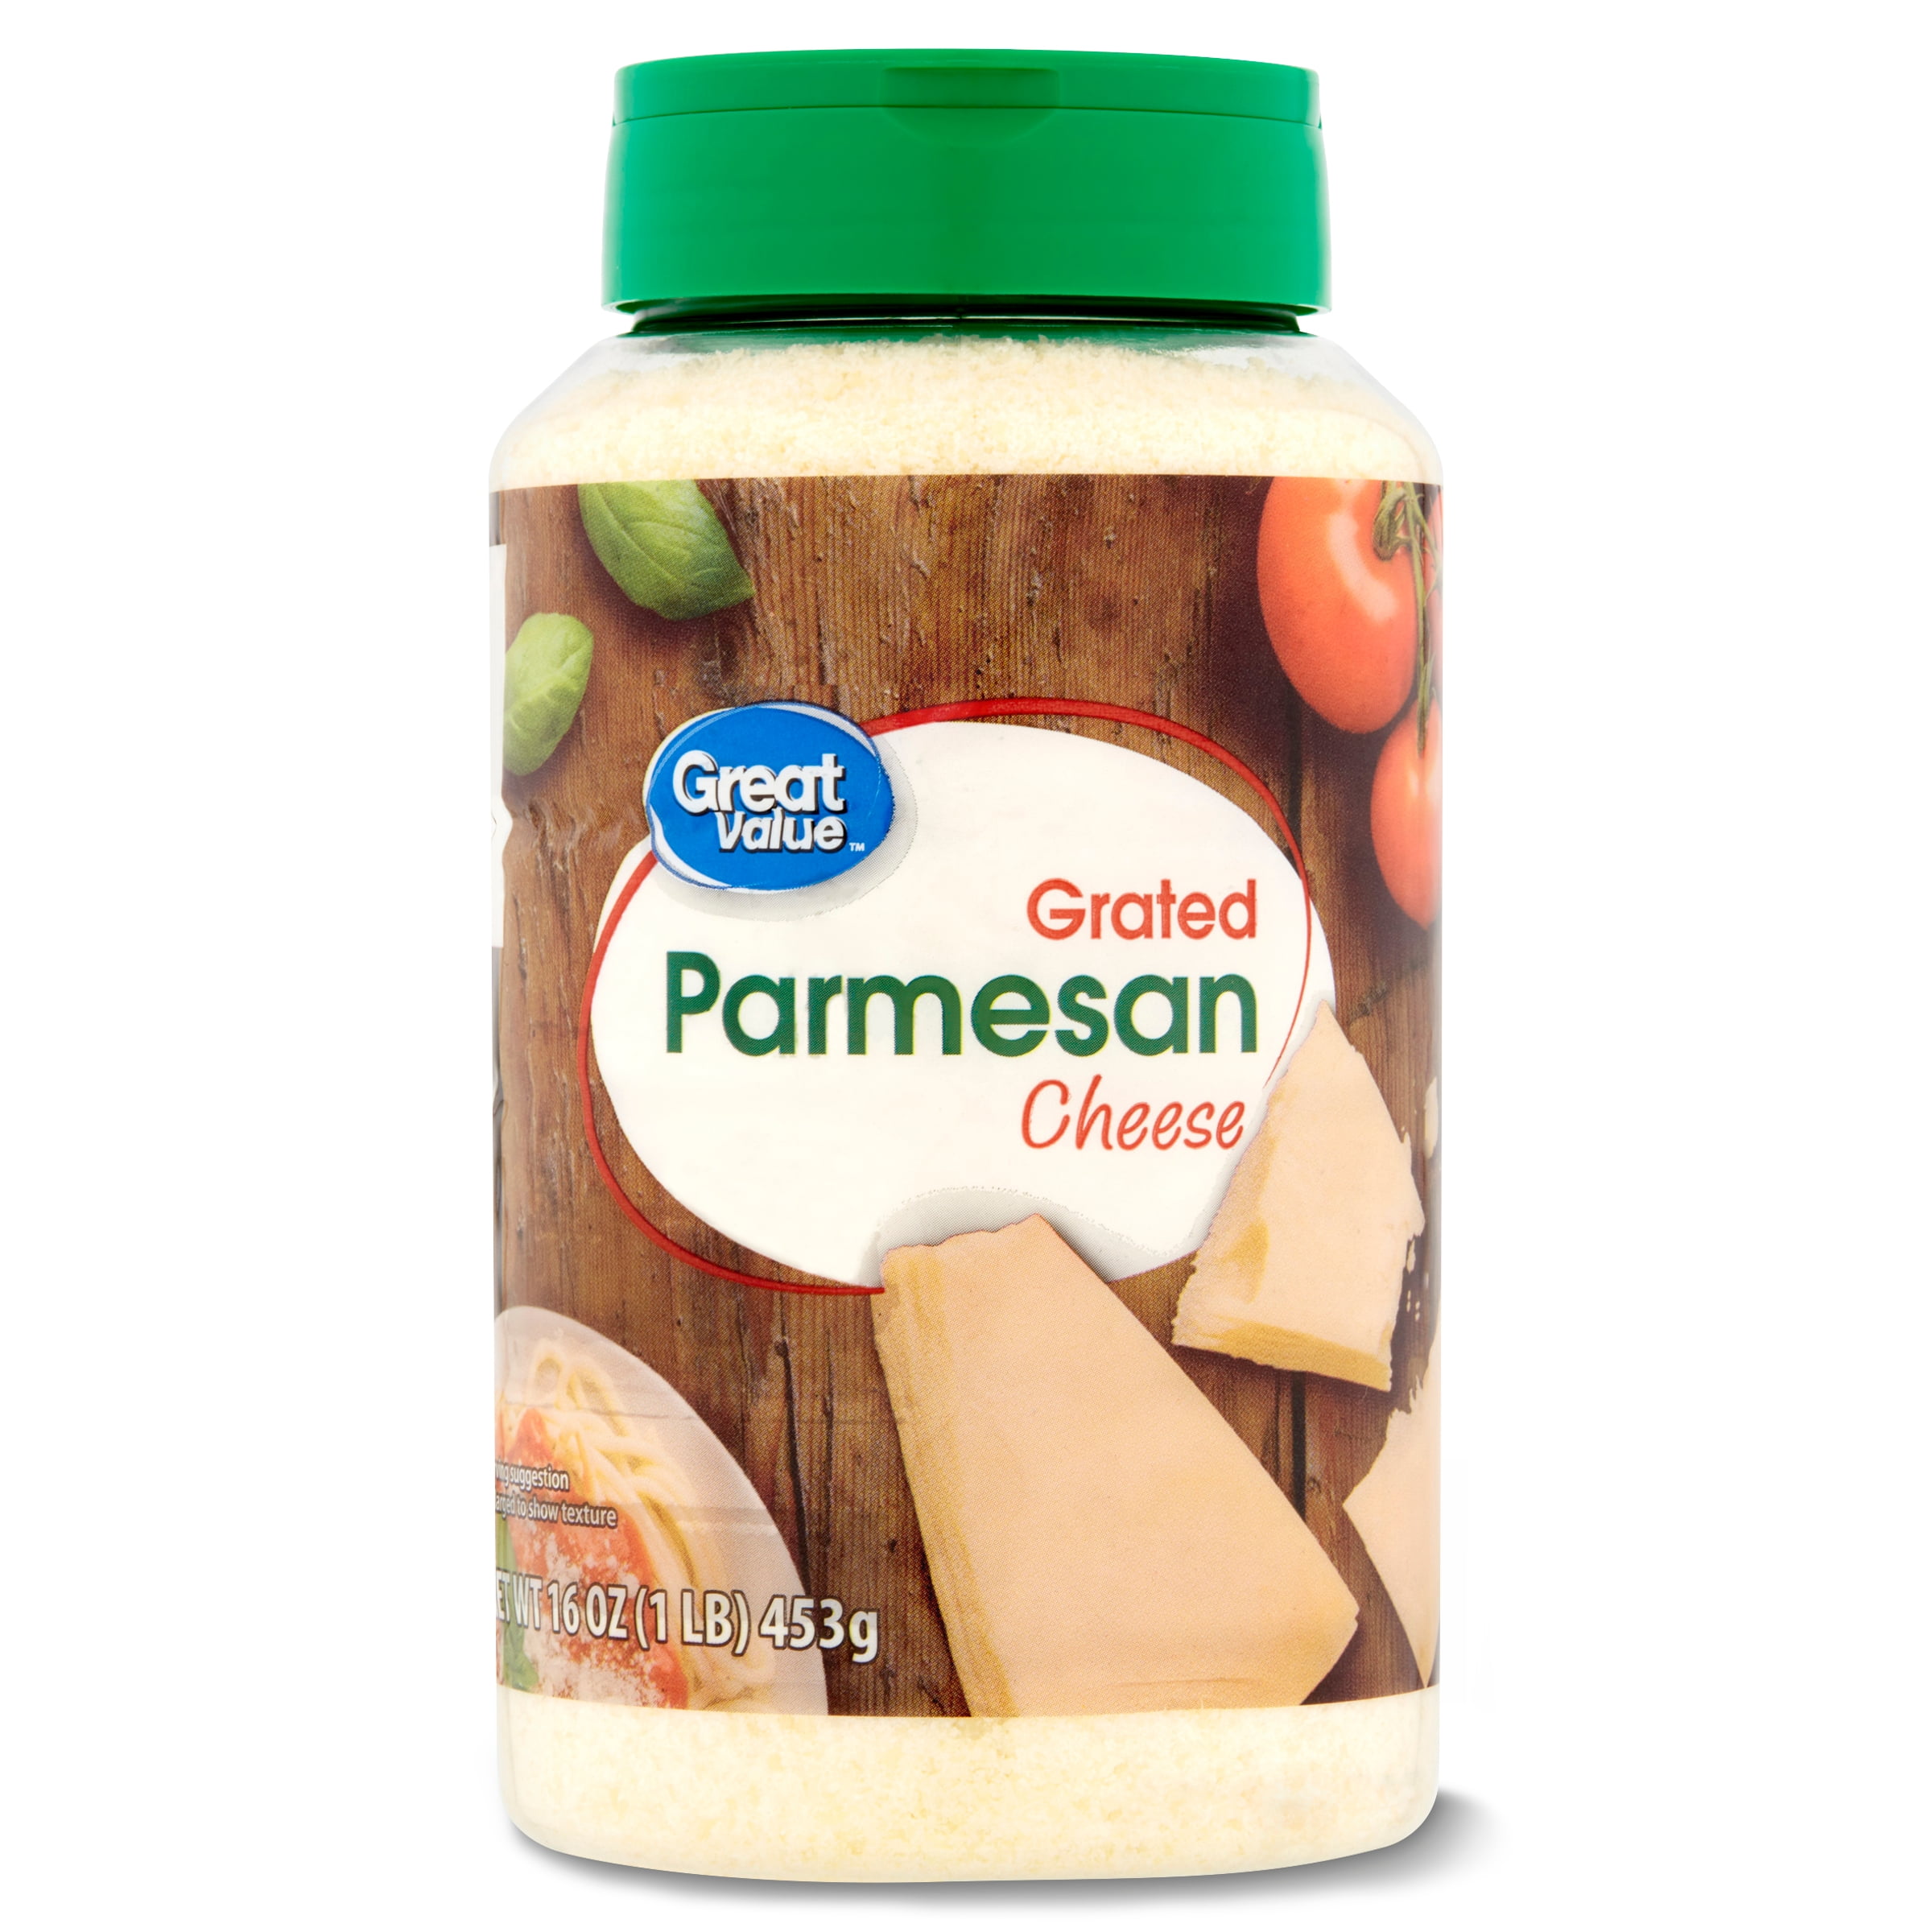 Top 96+ Images what aisle is parmesan cheese in walmart Completed